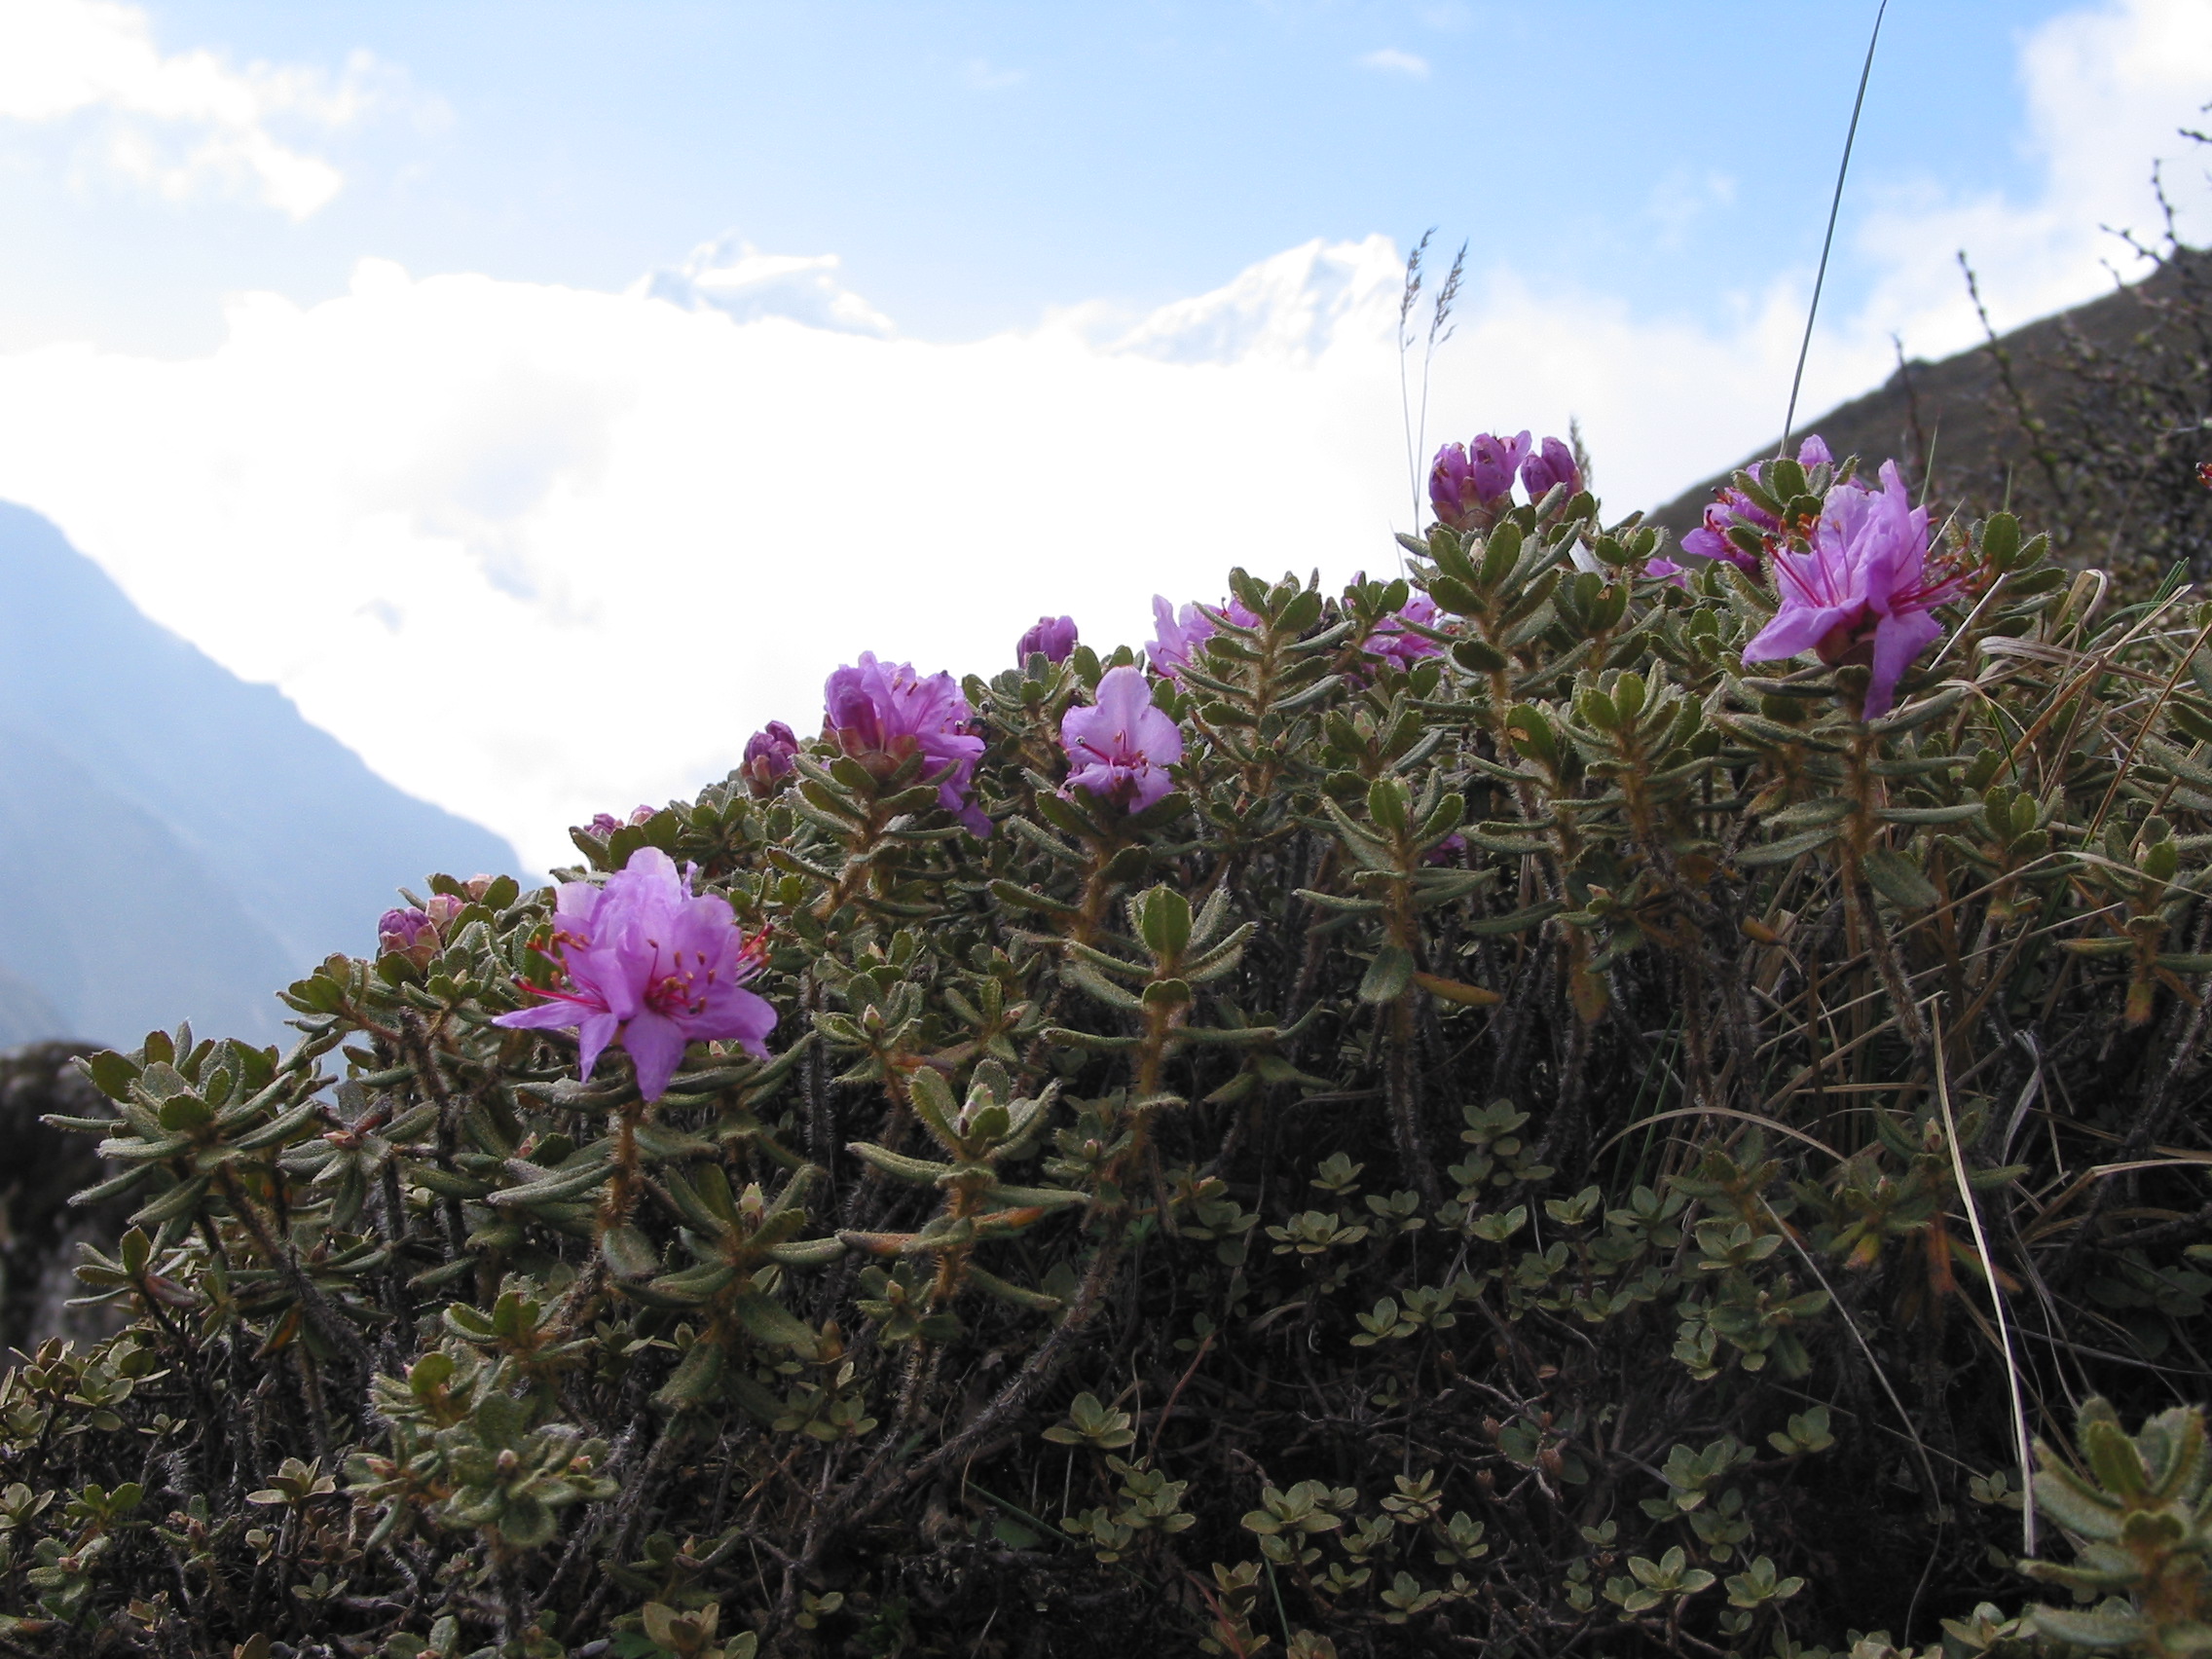 Flowers and fauna in Everest region